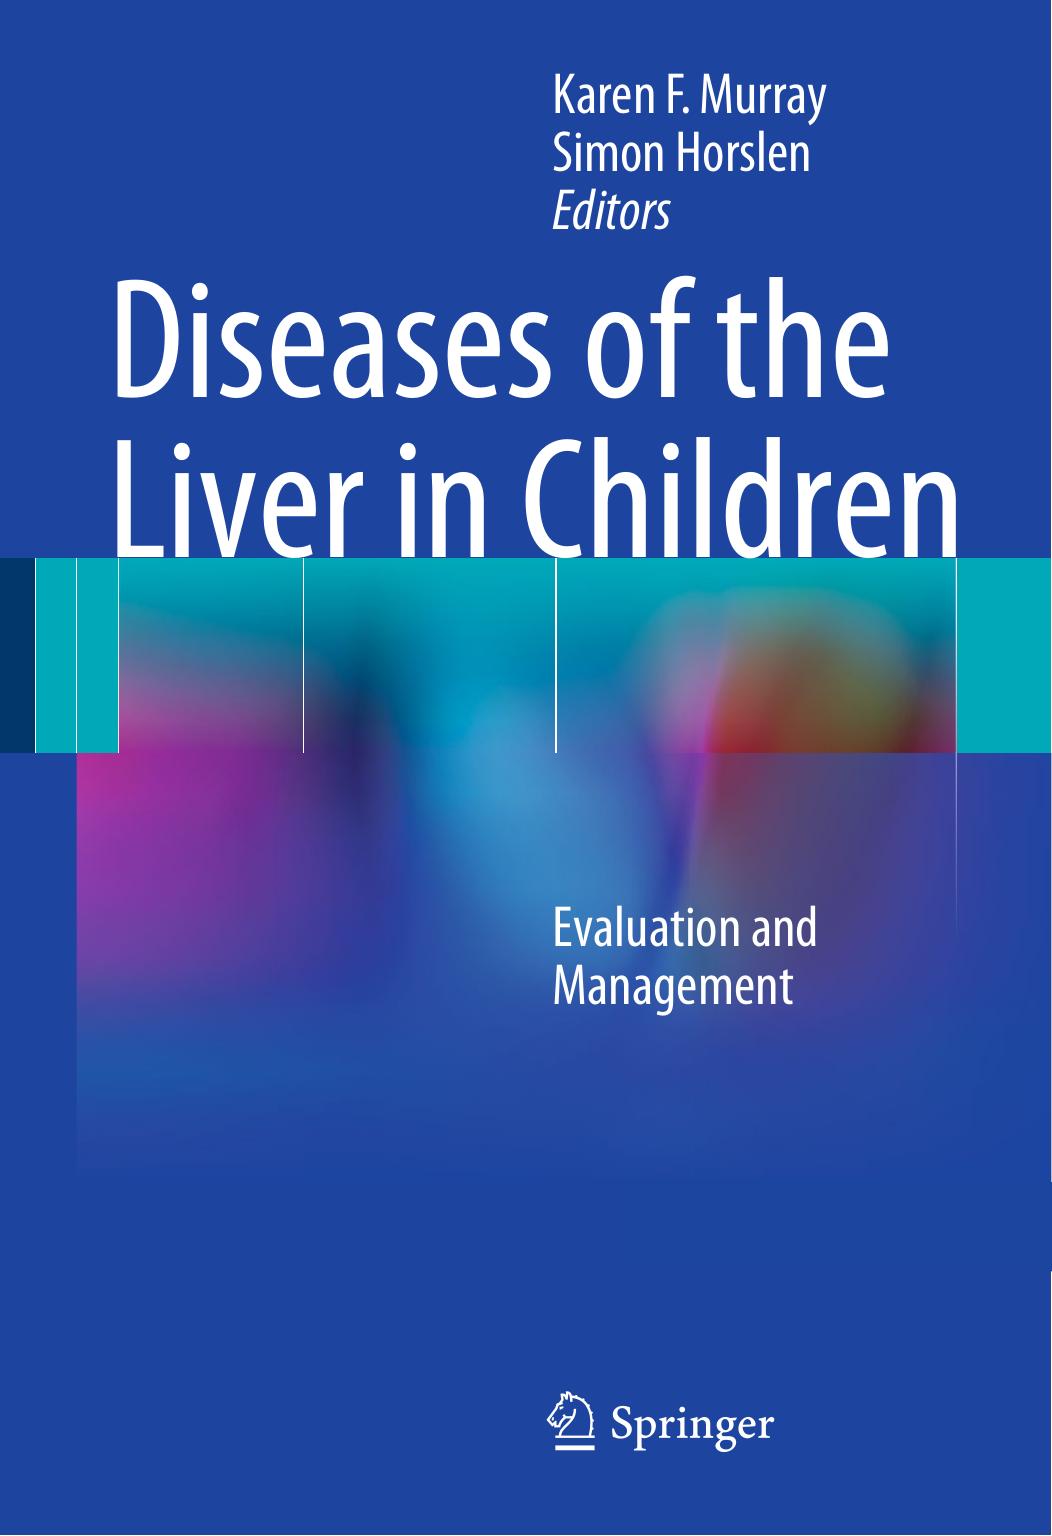 DISEASES OF THE LIVER IN CHILDREN 2014